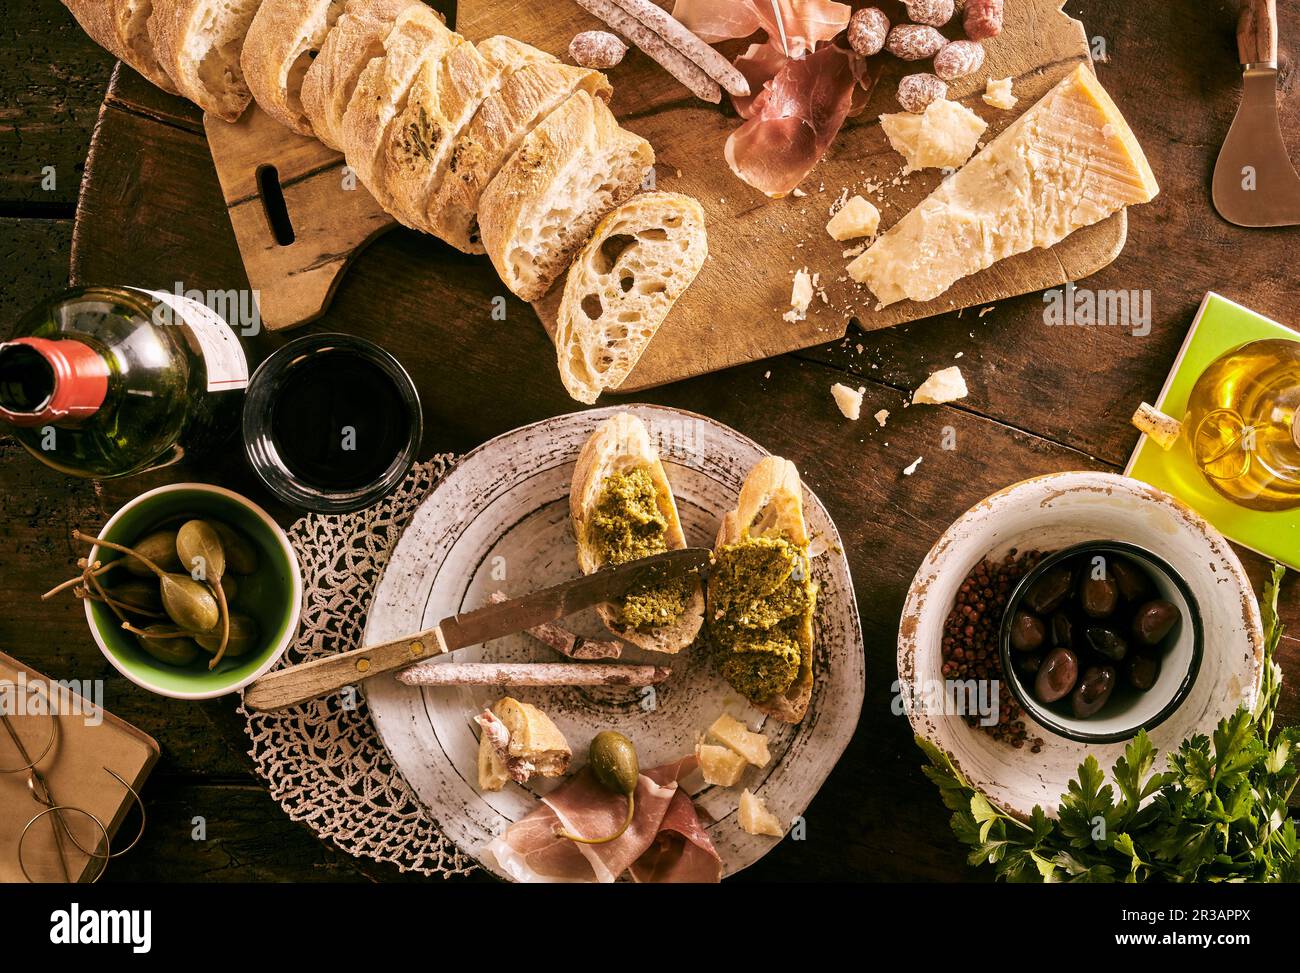 Bruschetta with pesto, mini salami, olives, Parmesan, olive oil, giant capers and red wine Stock Photo